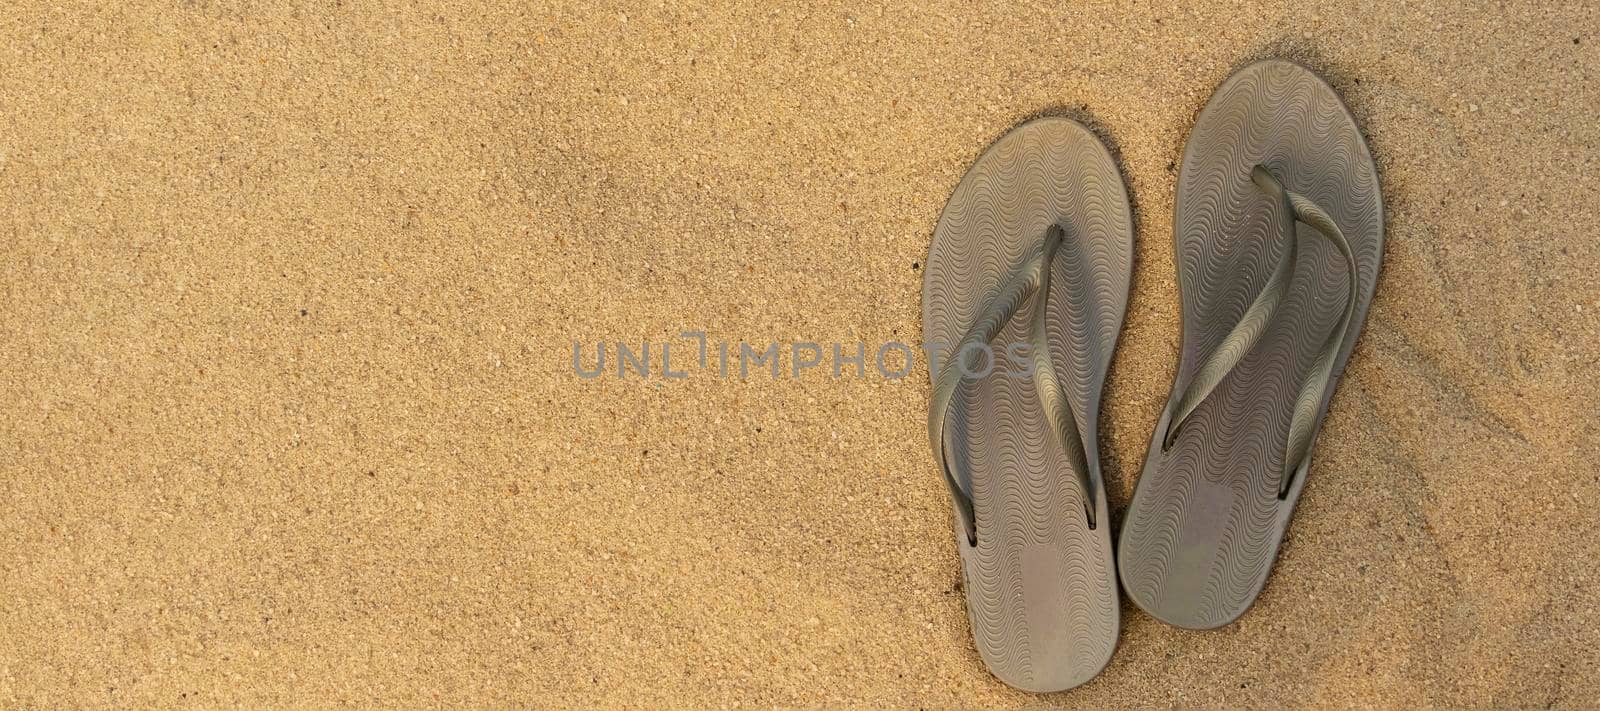 banner with light sandal or flip flops on the beach. golden sand. place for your text. top view by Leoschka